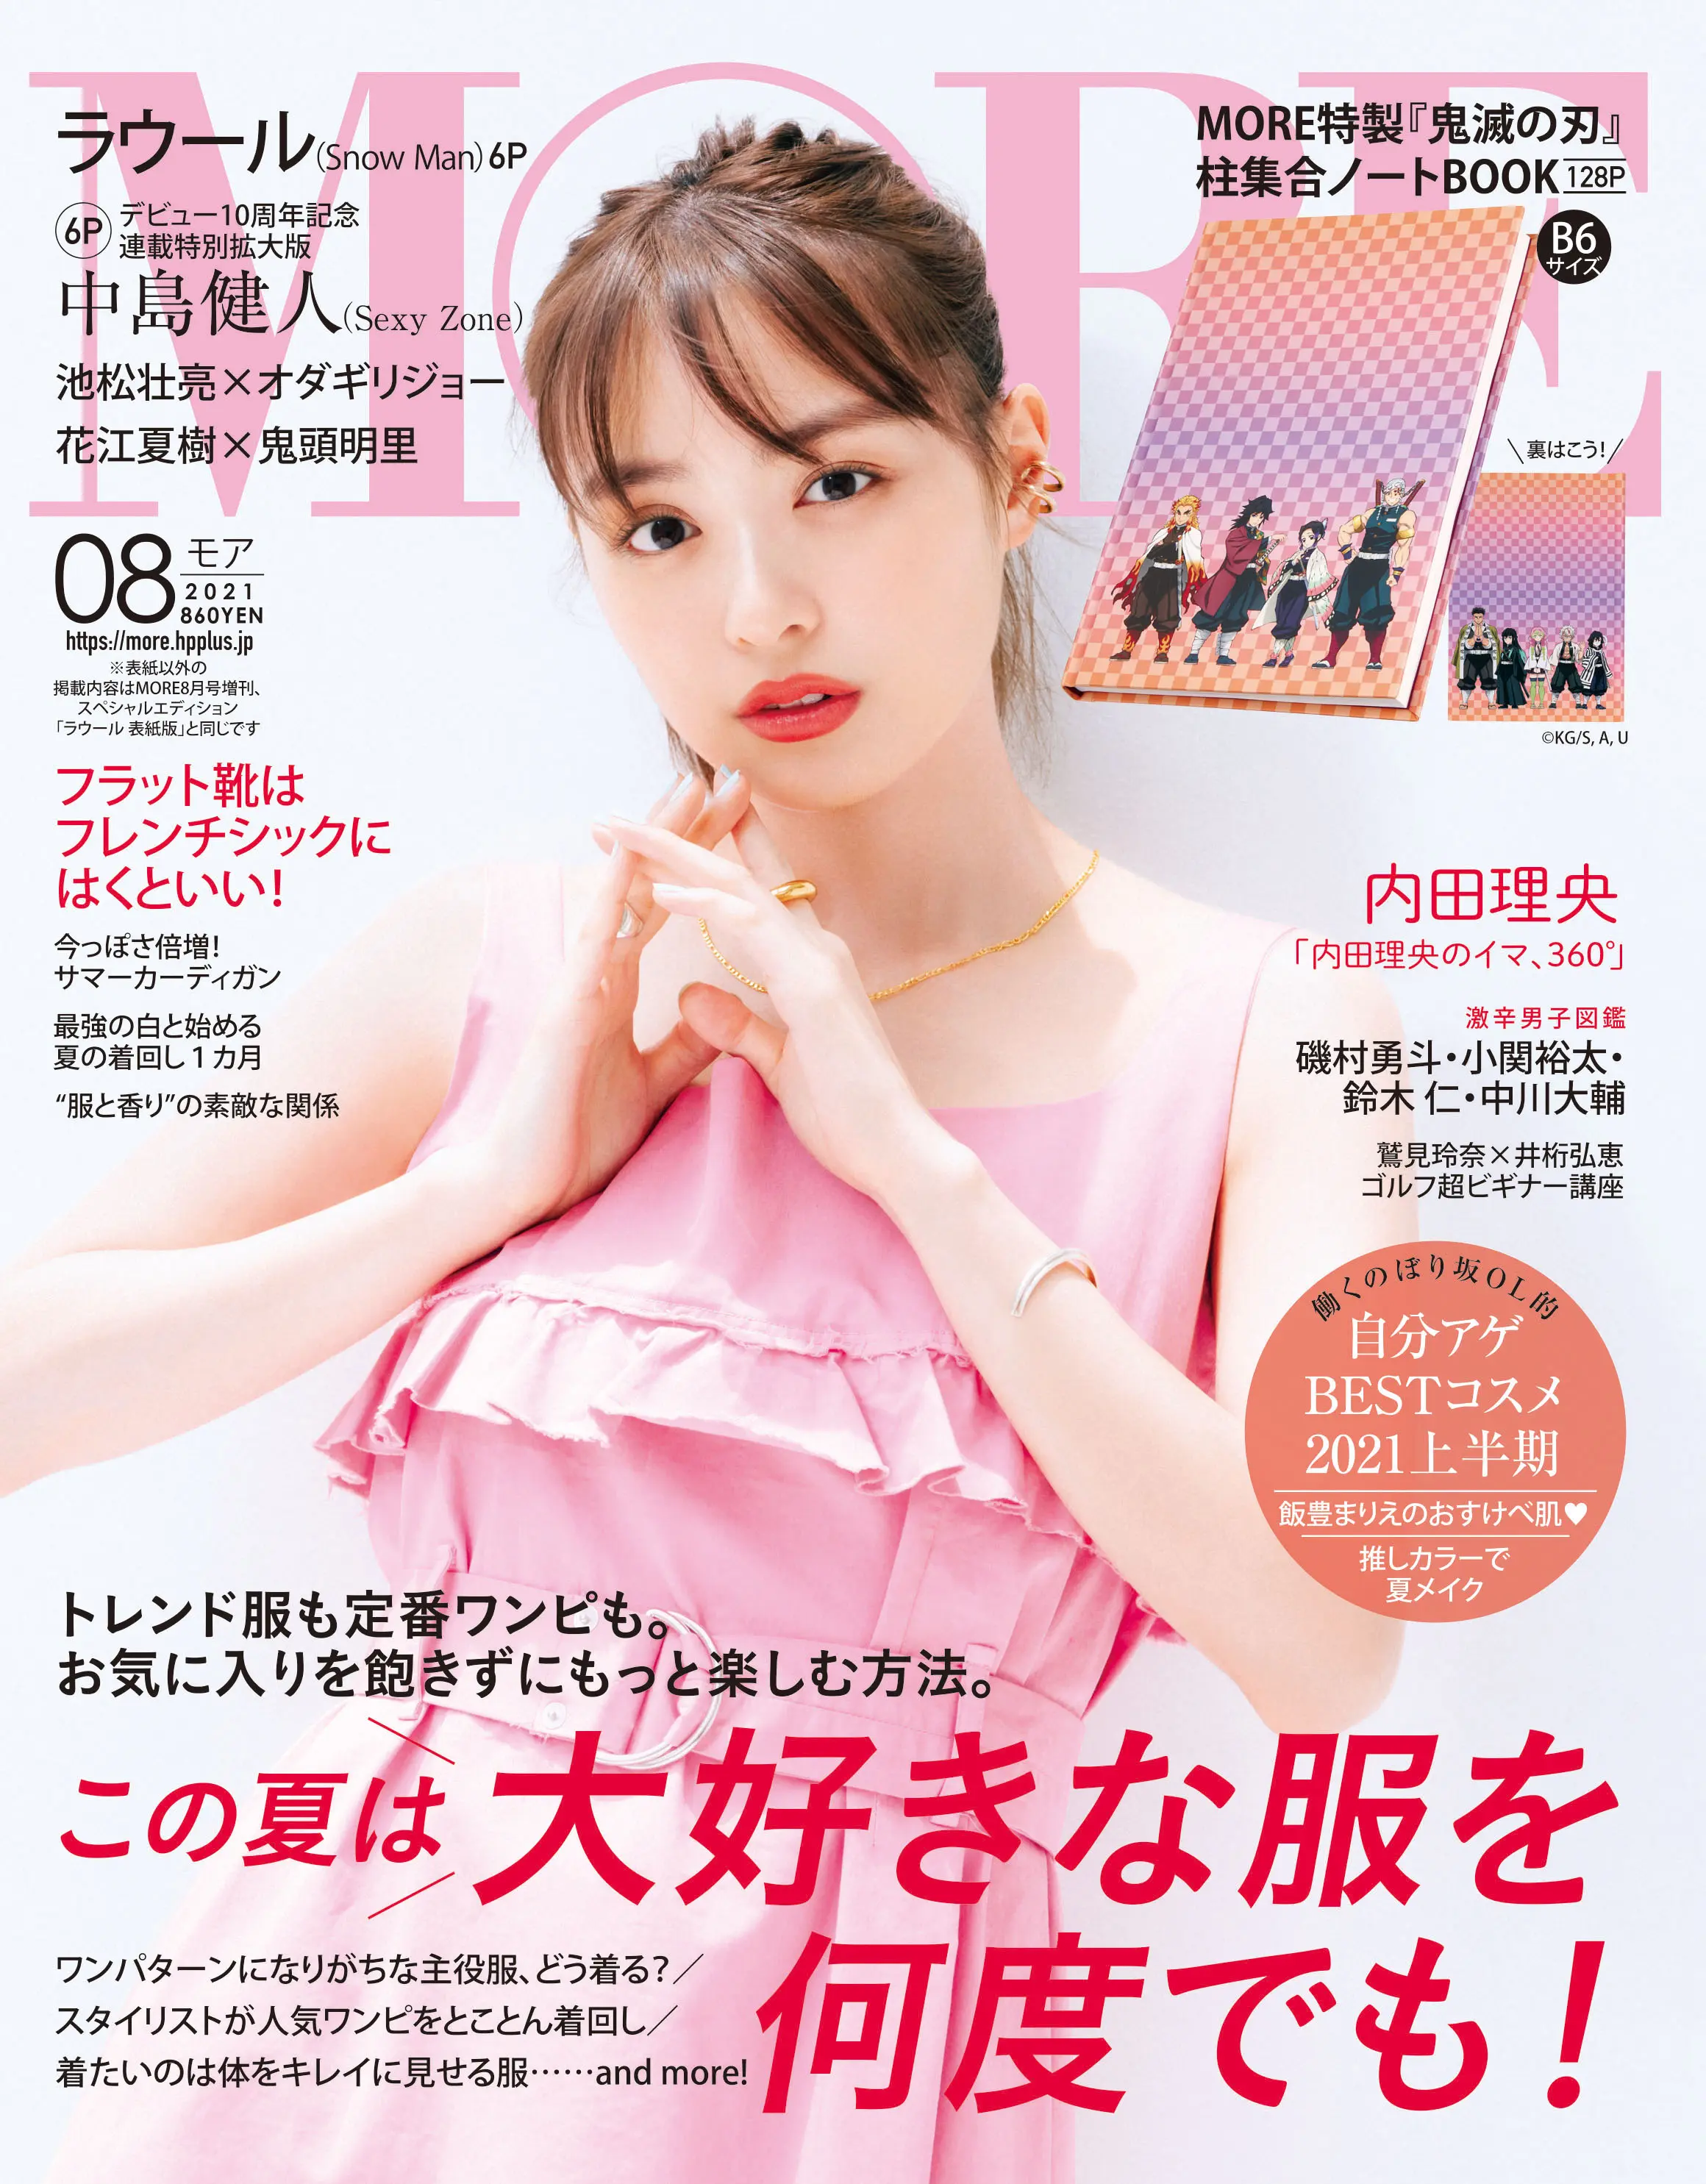 More ８月号 雑誌 More 試し読み Daily More